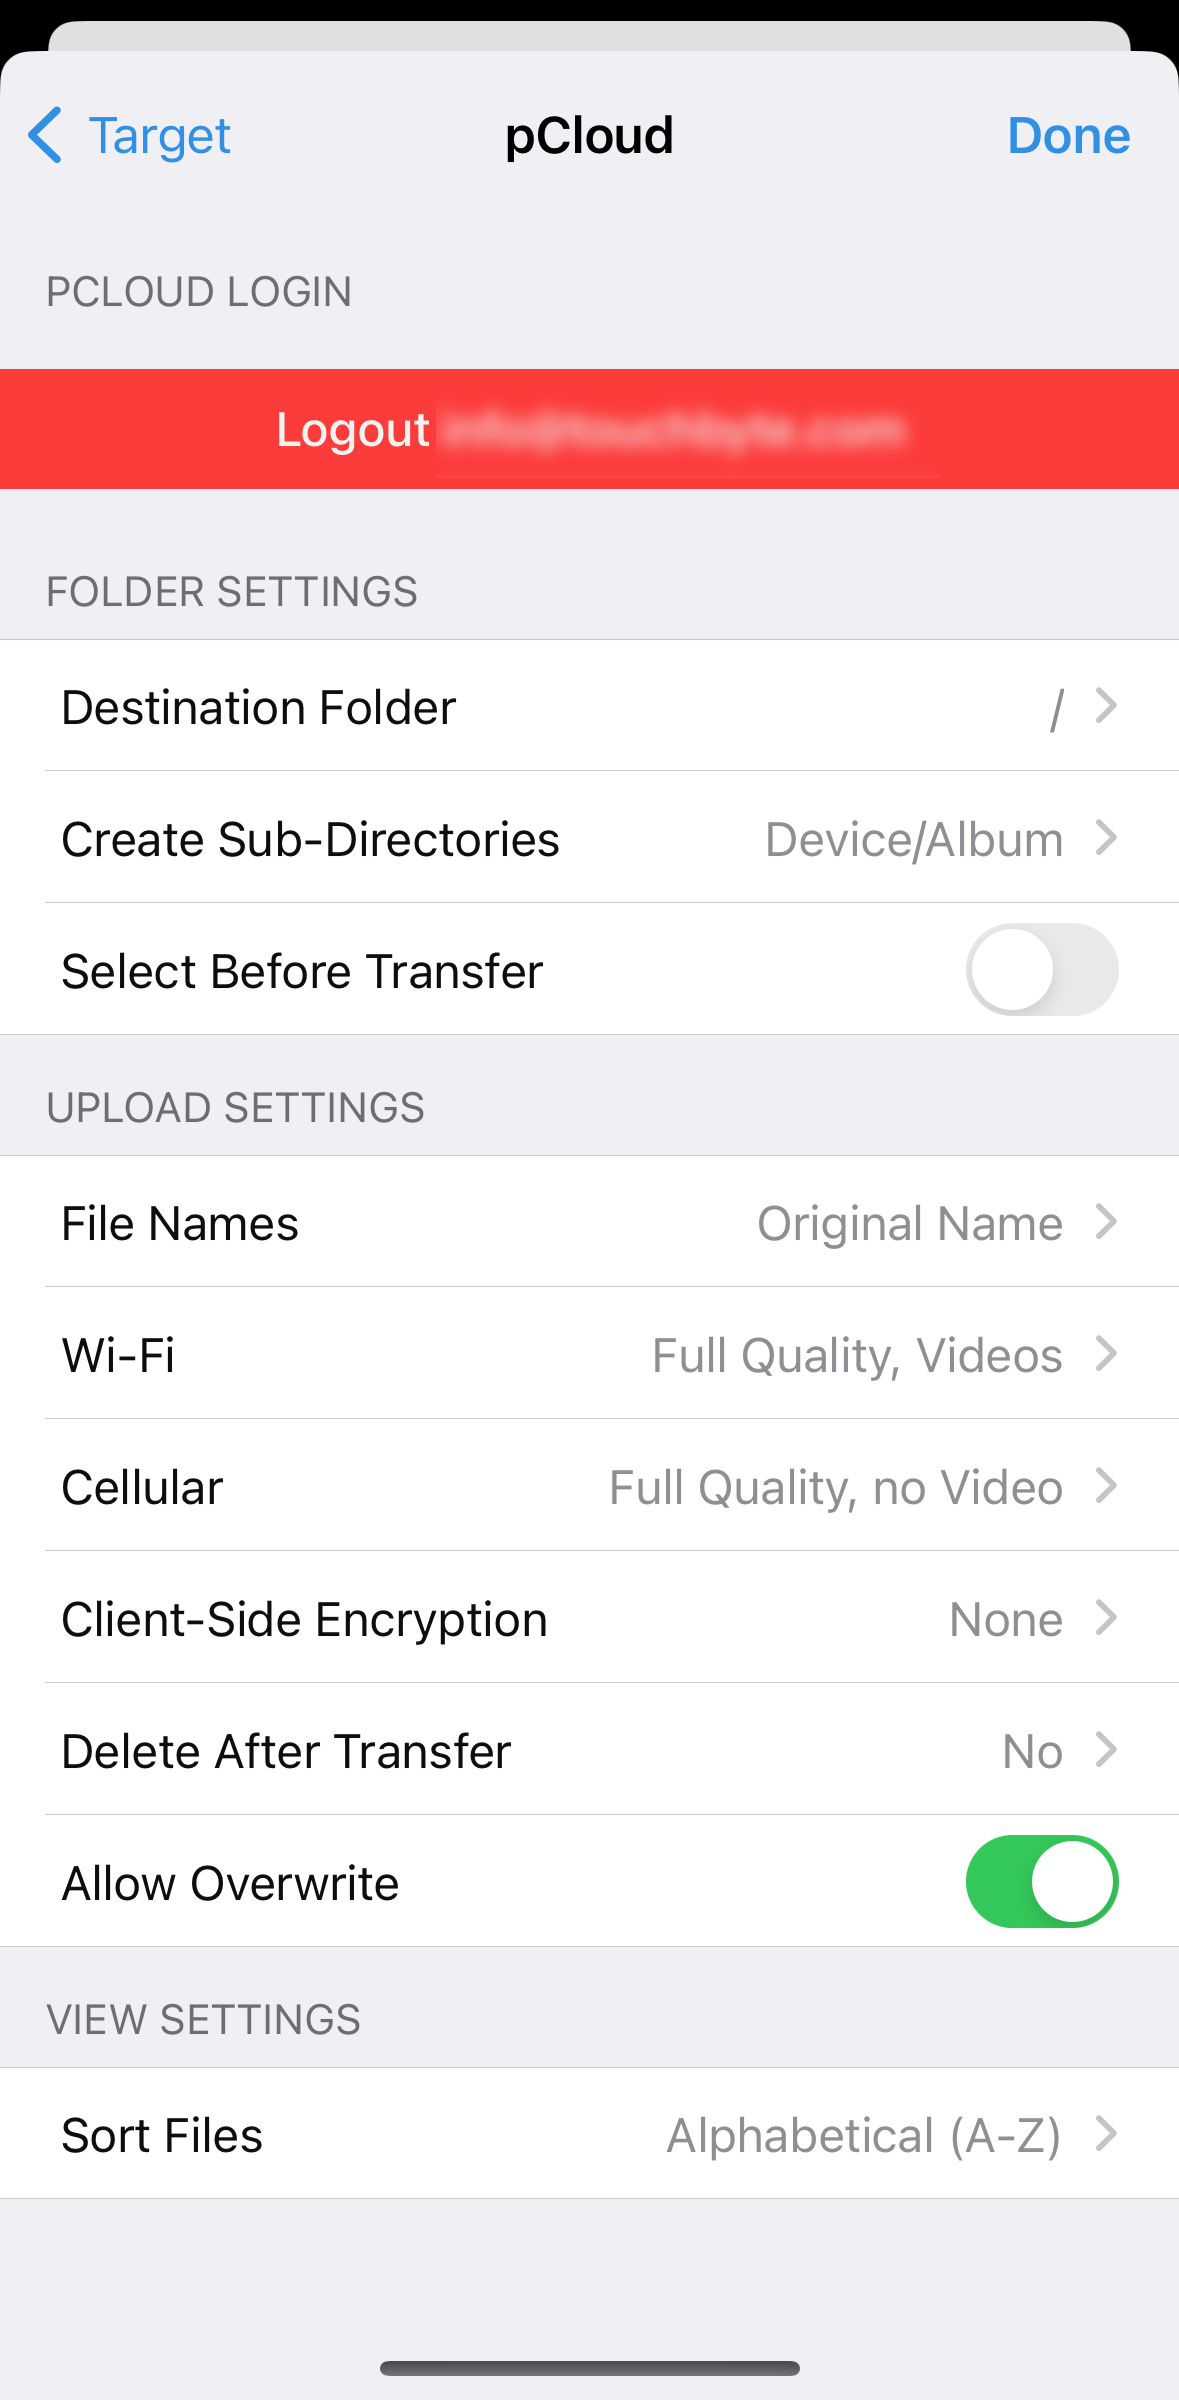 pCloud settings with destination folder